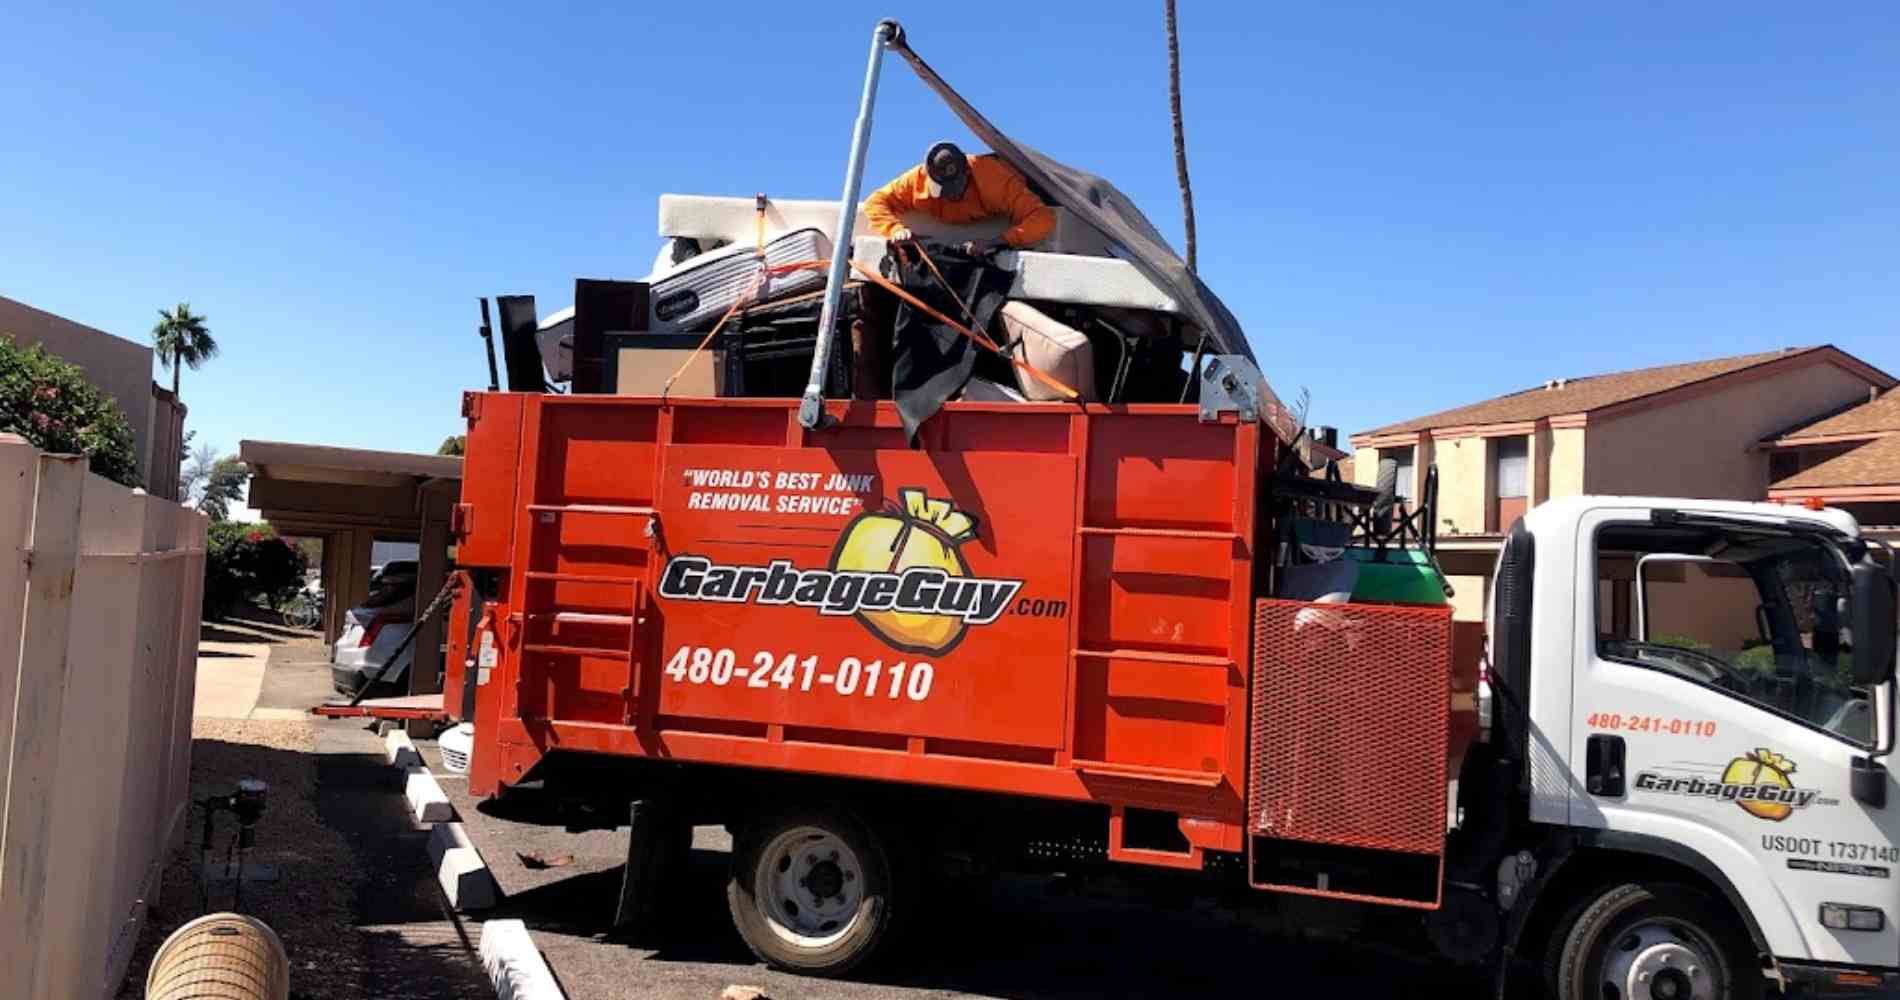 #1 for Furniture Removal in Mesa, AZ With Over 1200 5-Star Reviews!